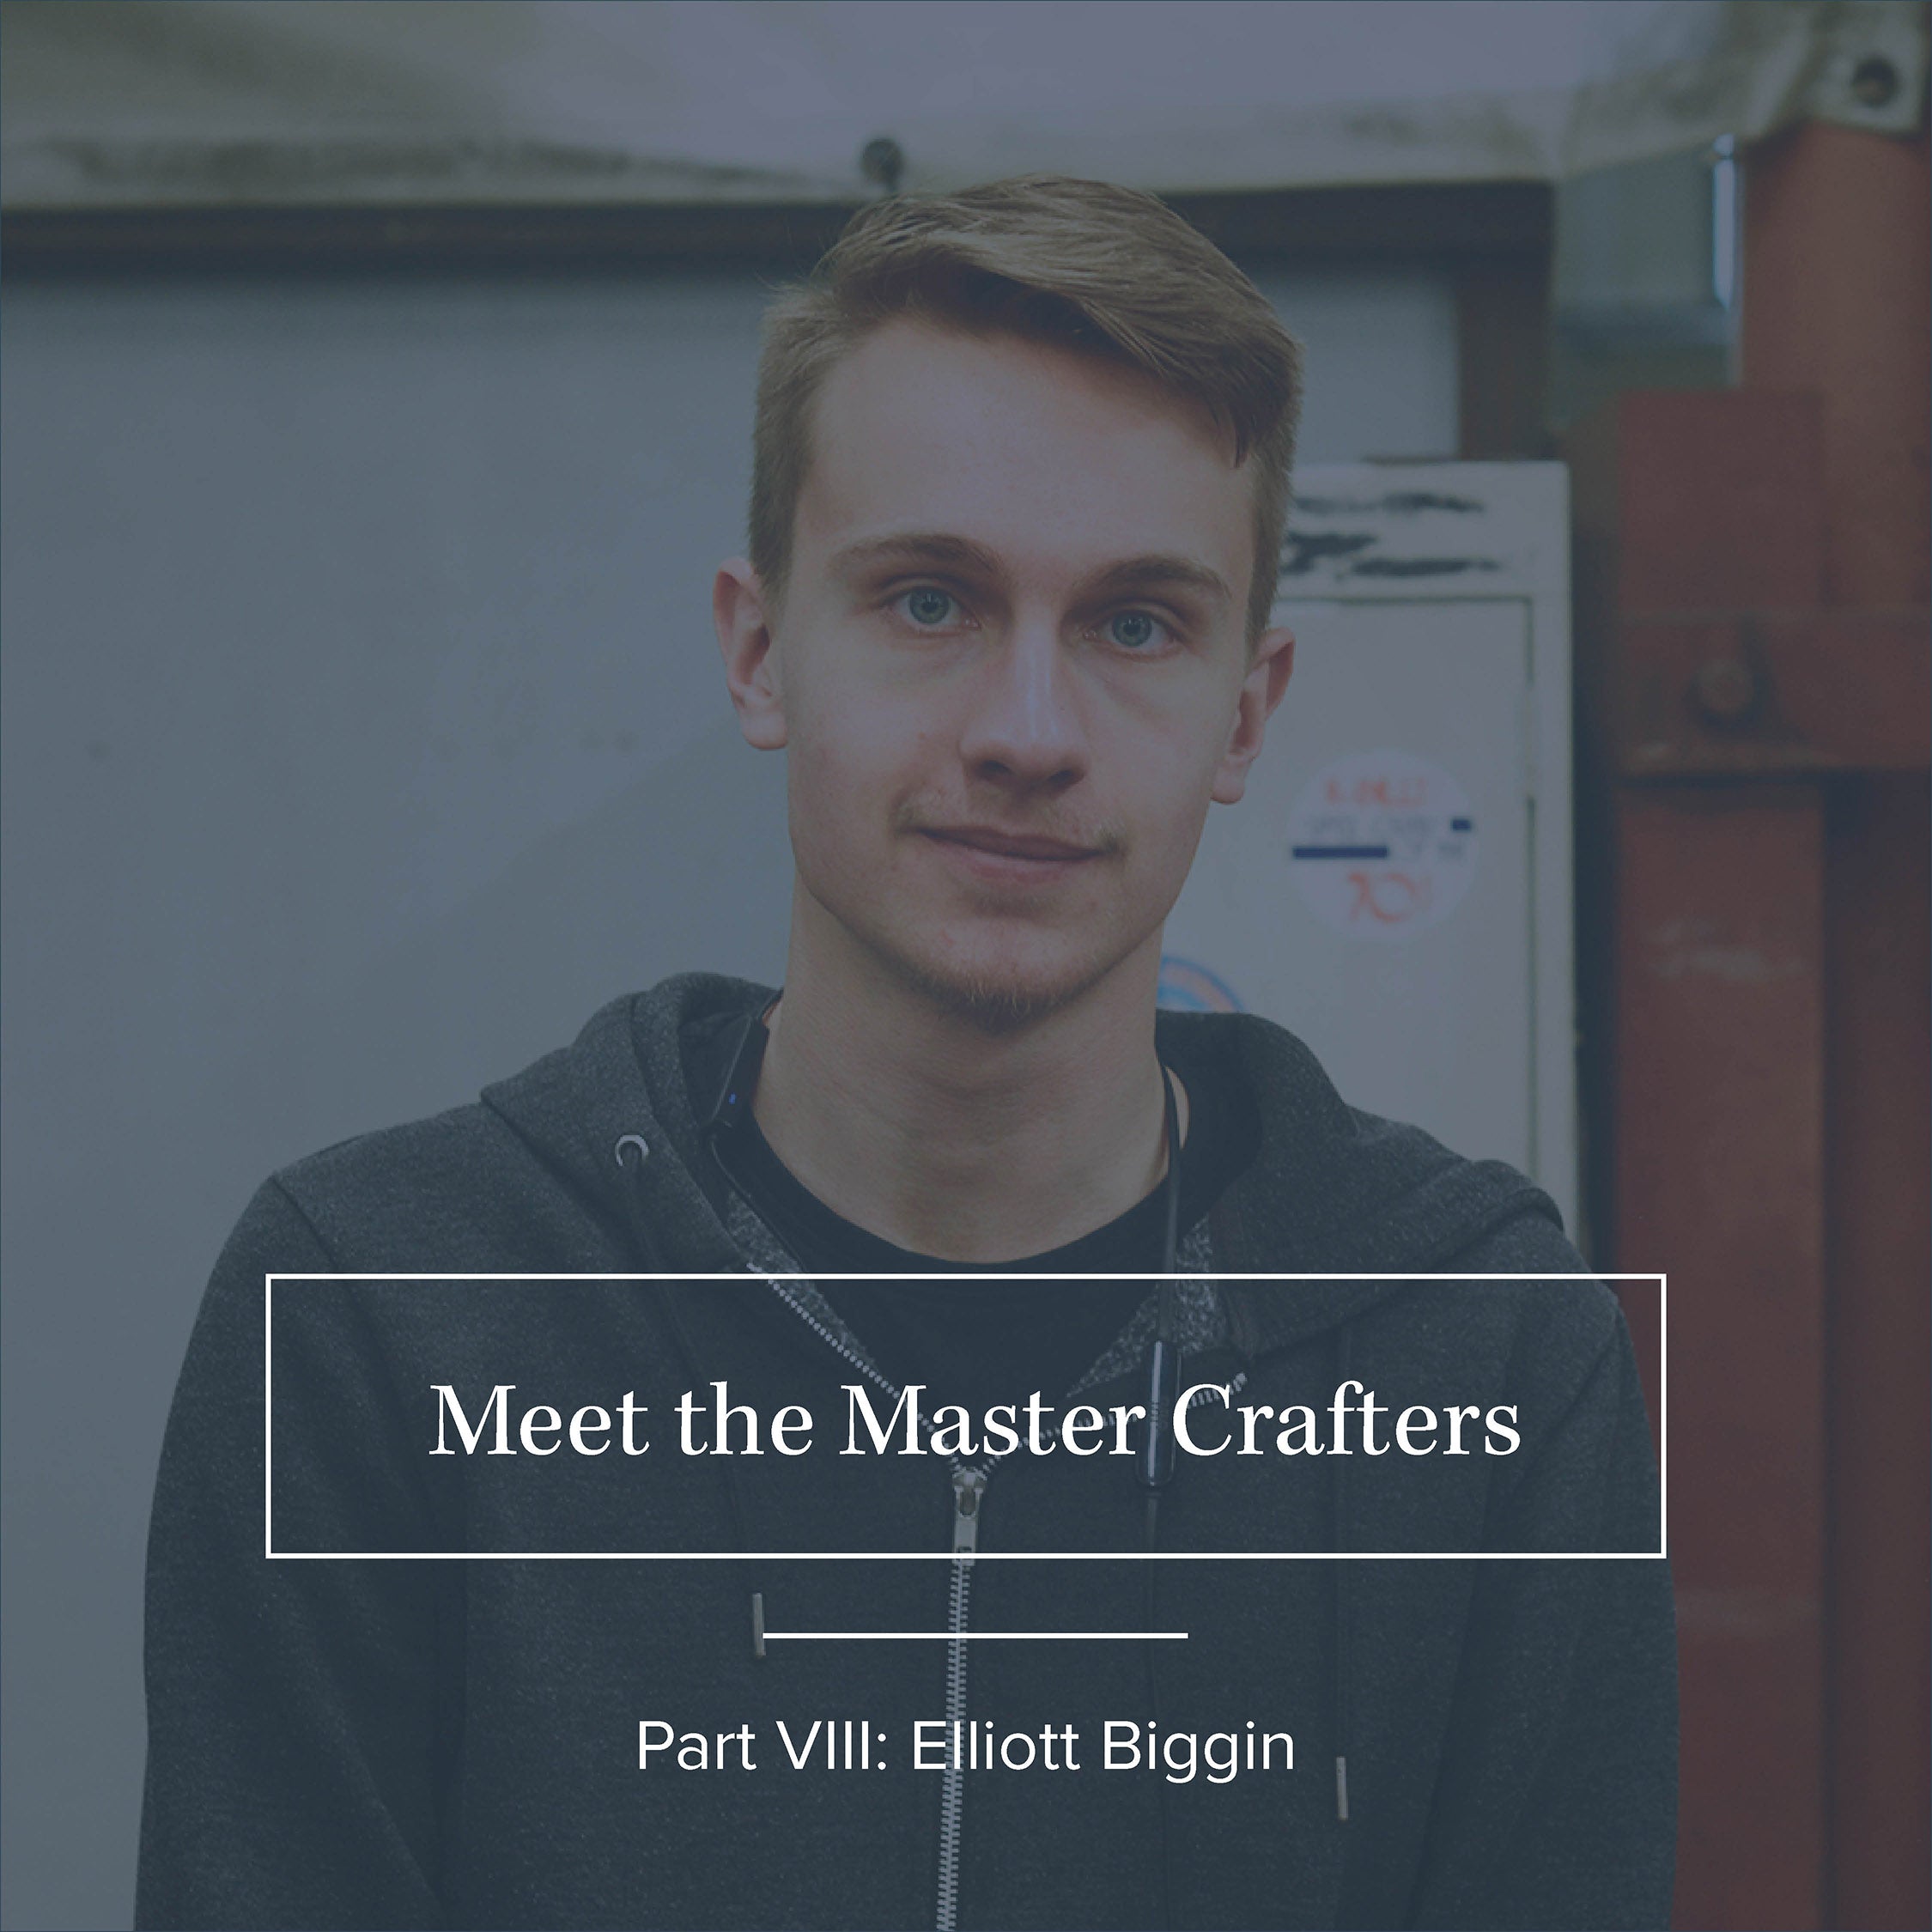 Meet the Master Crafters: Part VIII